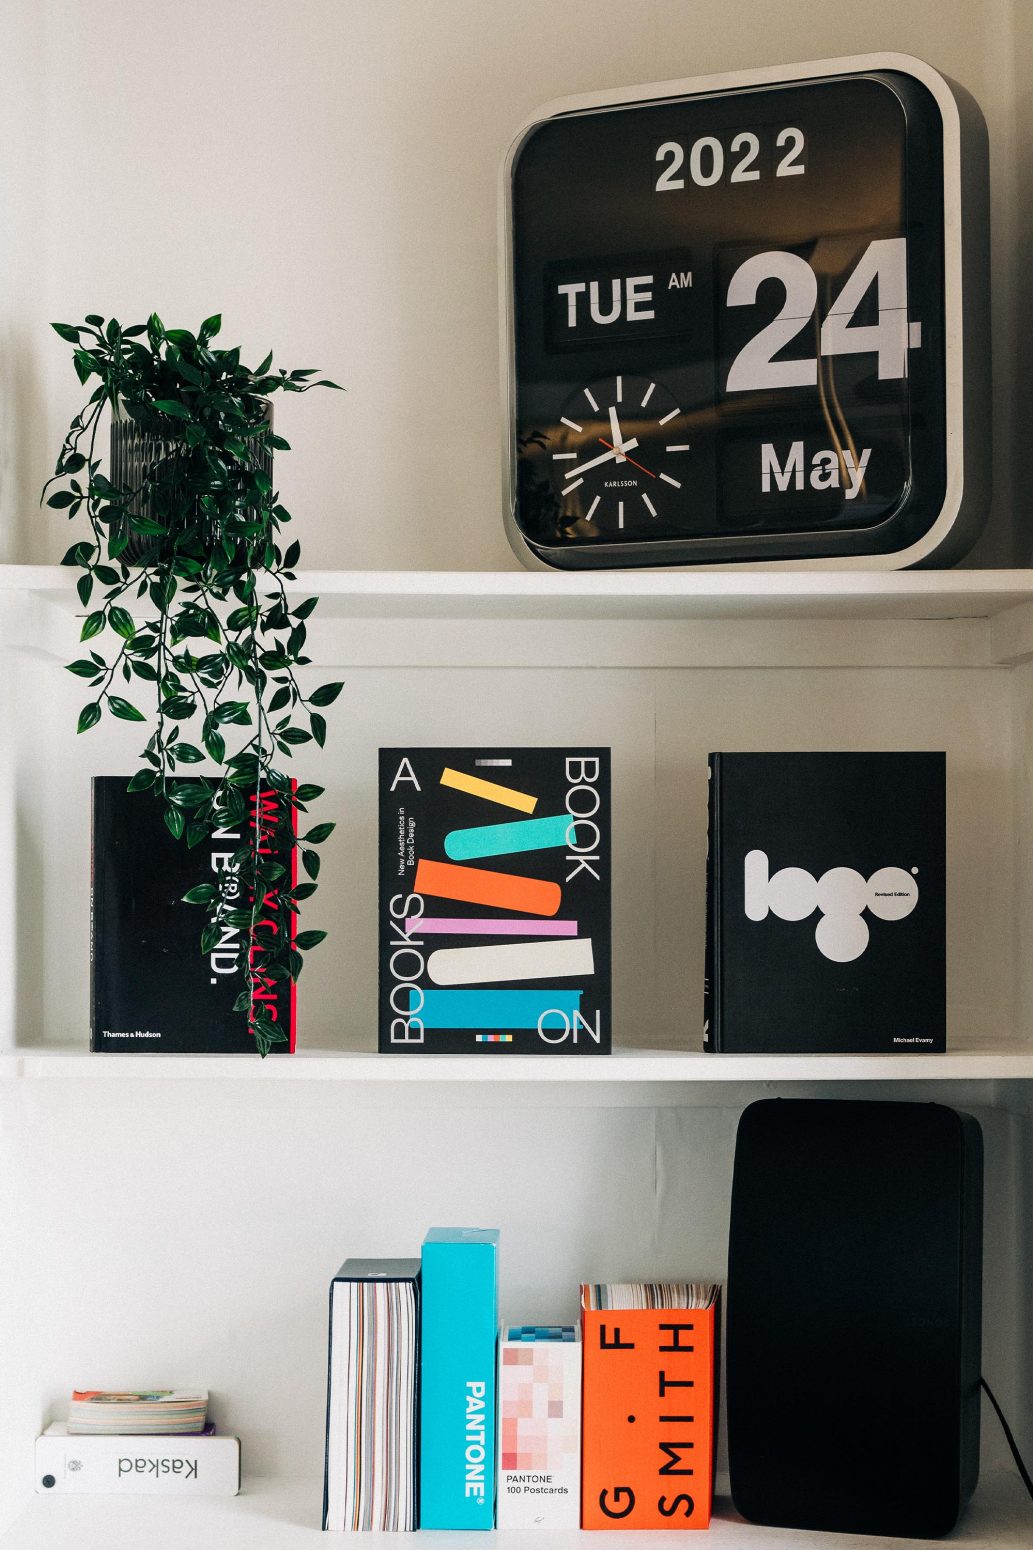 A modern indoor shelf displaying various design books, a large digital clock showing the date and time, and an indoor plant on the left. Emphasizing a minimalist aesthetic, the setup mirrors the brand design